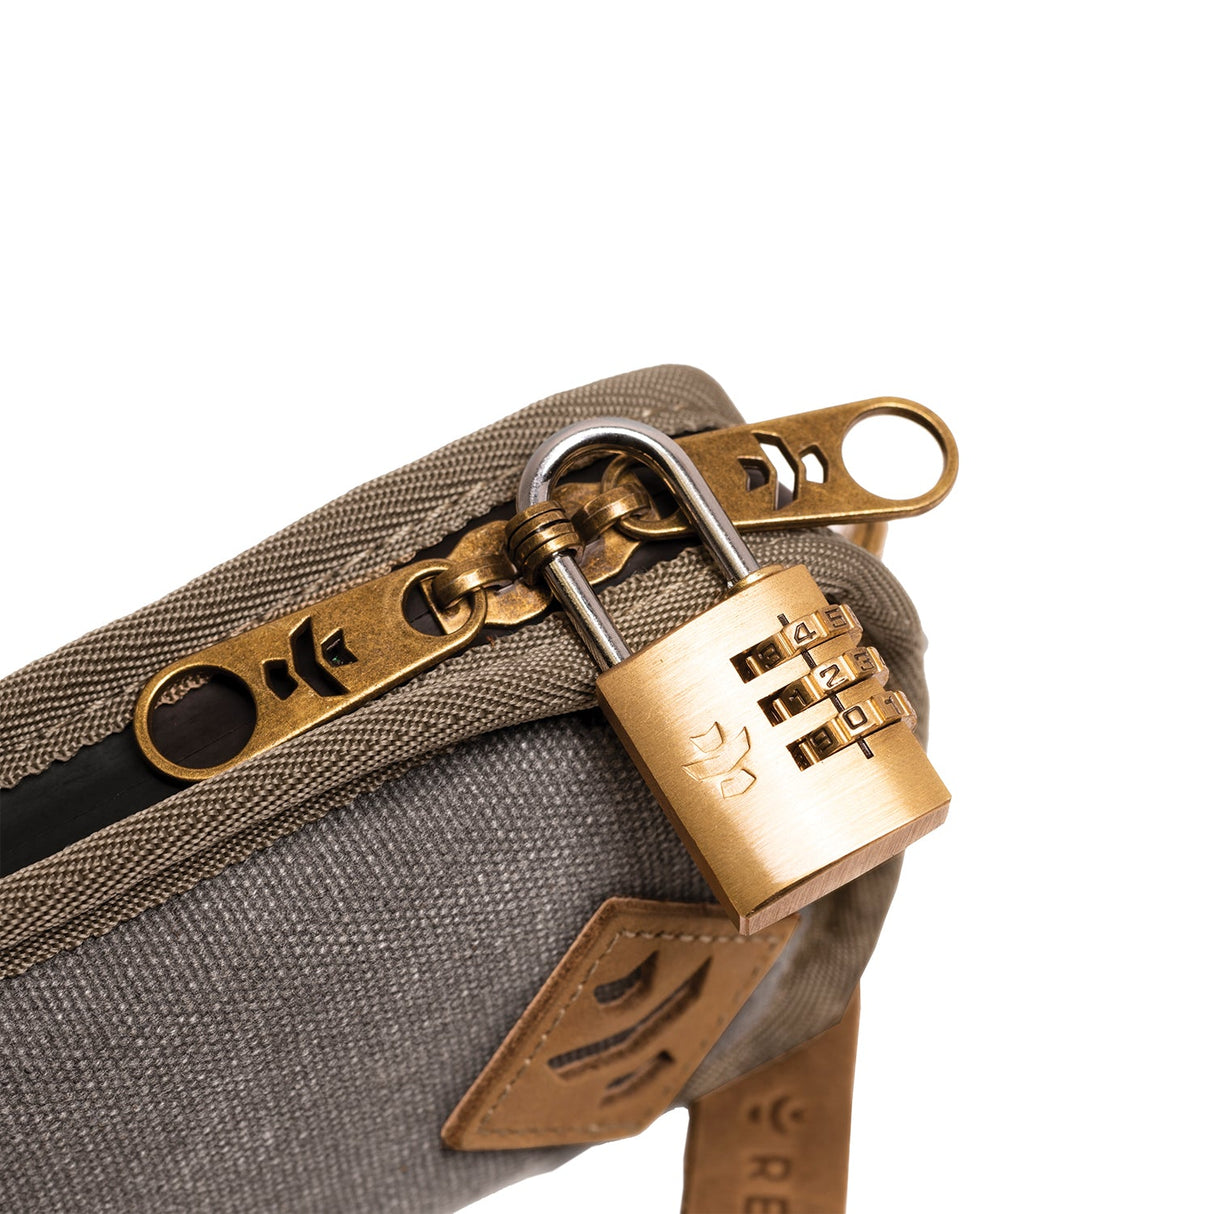 Close-up of The Gordito smell proof pouch by Revelry Supply with secure lock feature